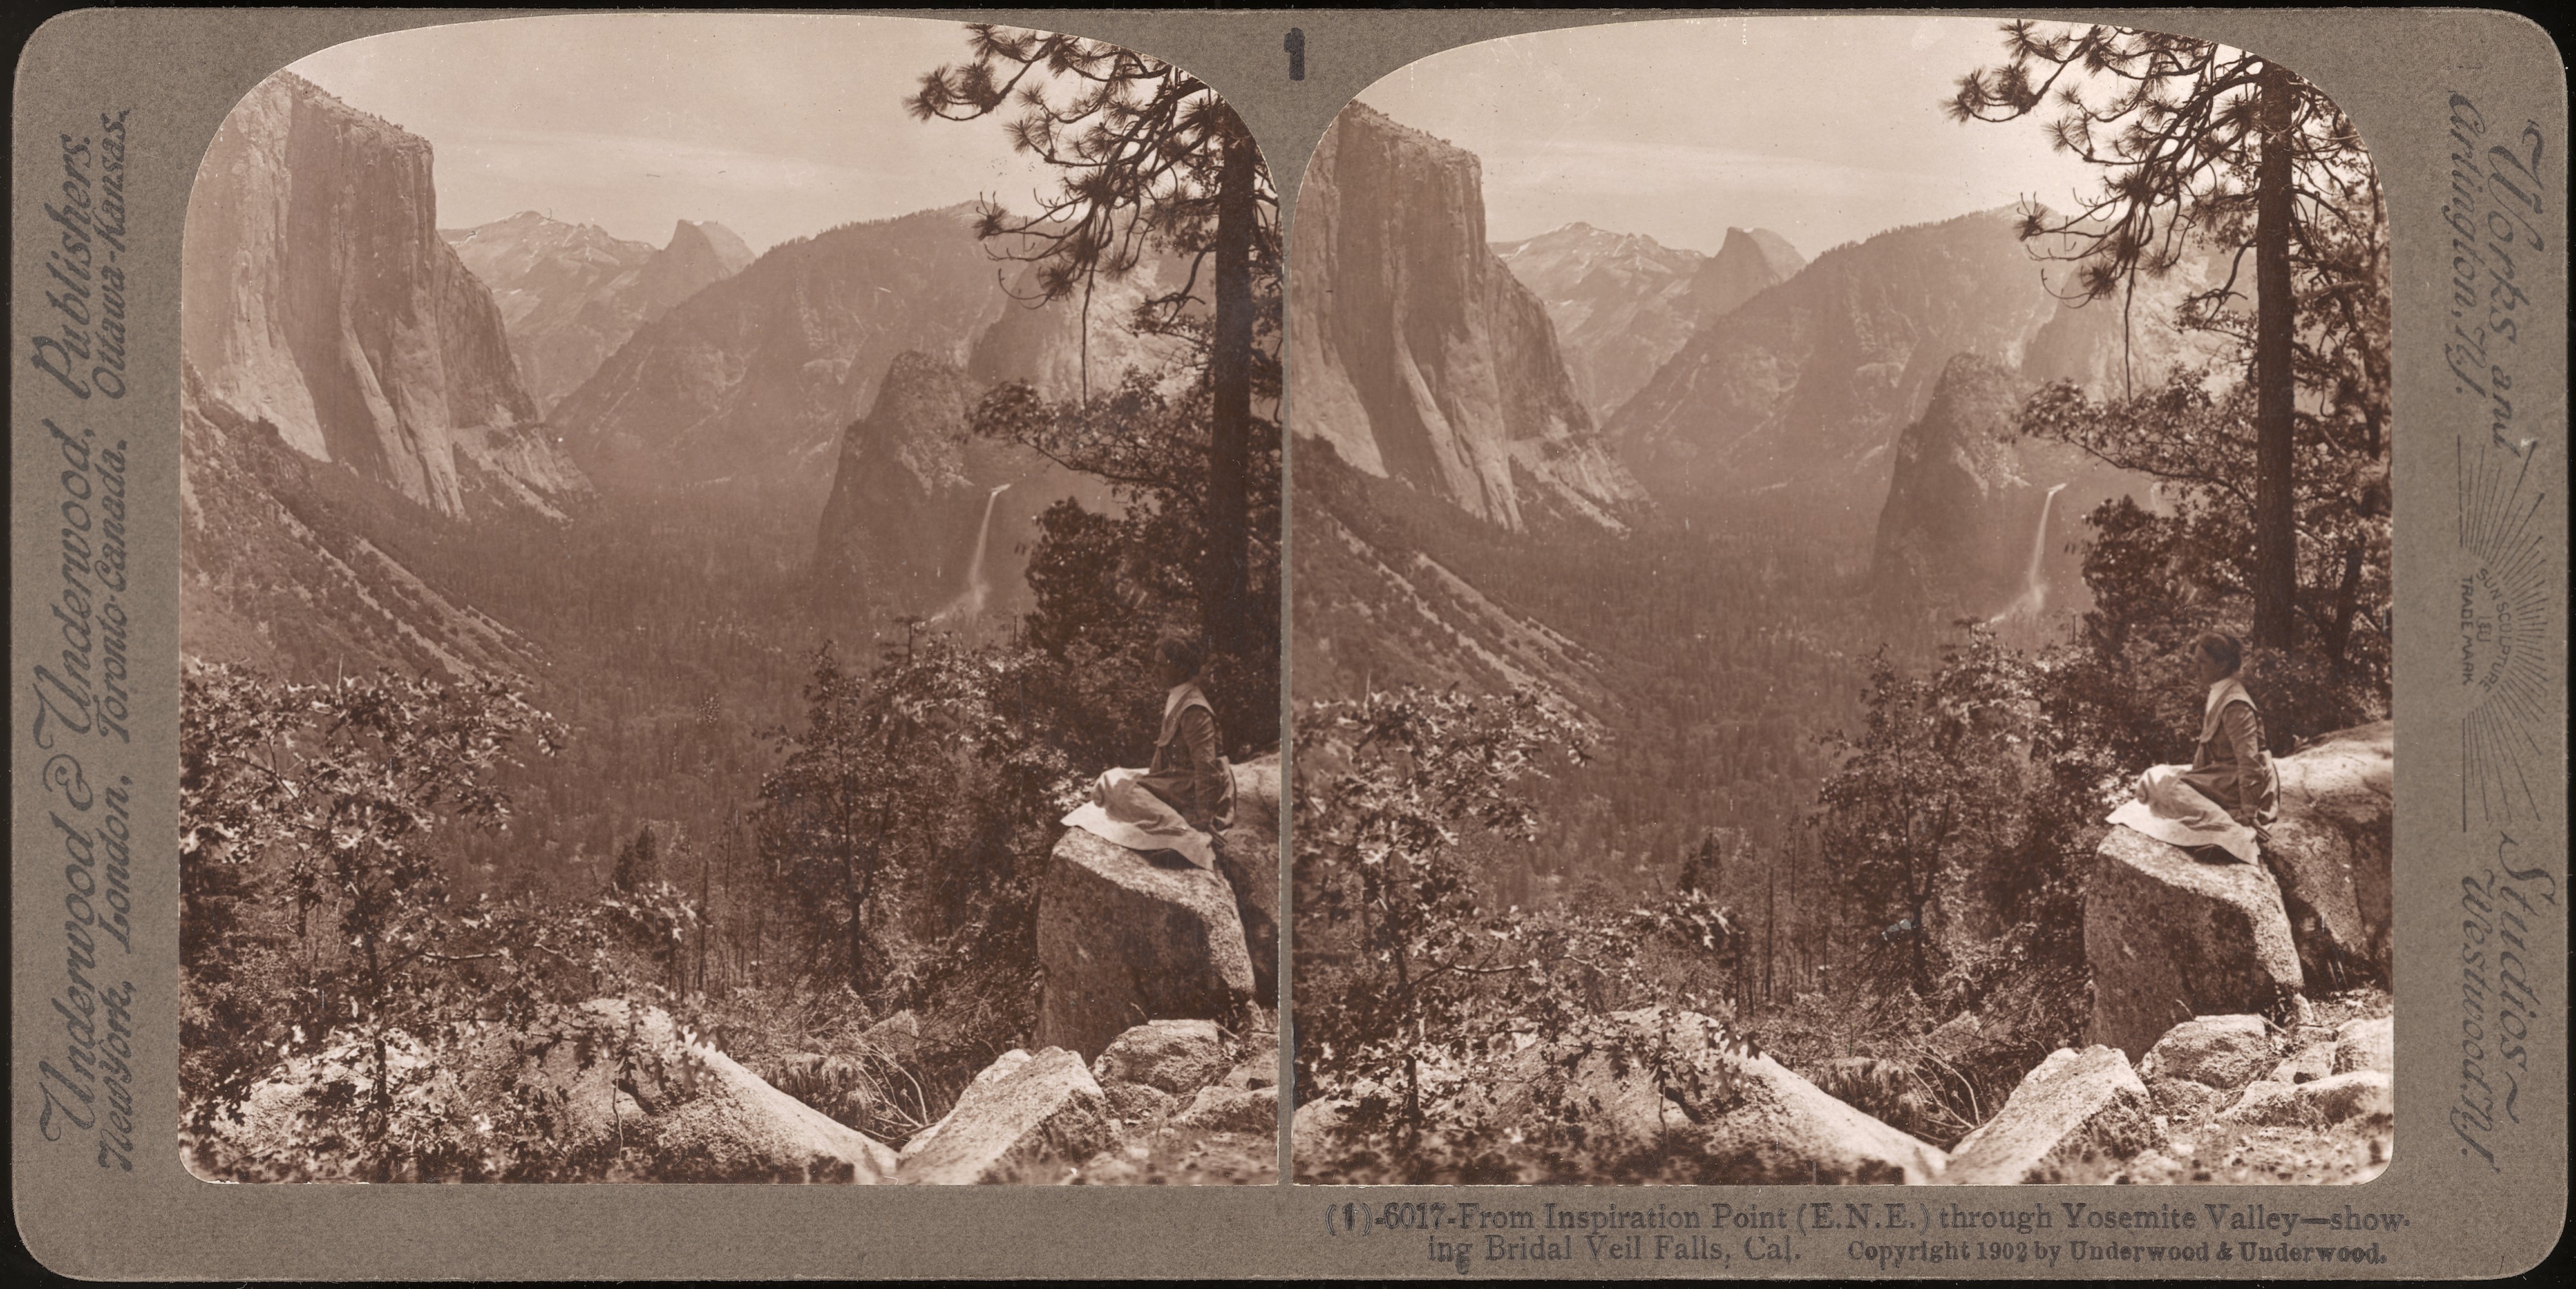 YOSEMITE CA From 600/1200 Card Set Keystone Stereoview of HALF DOME & VALLEY 